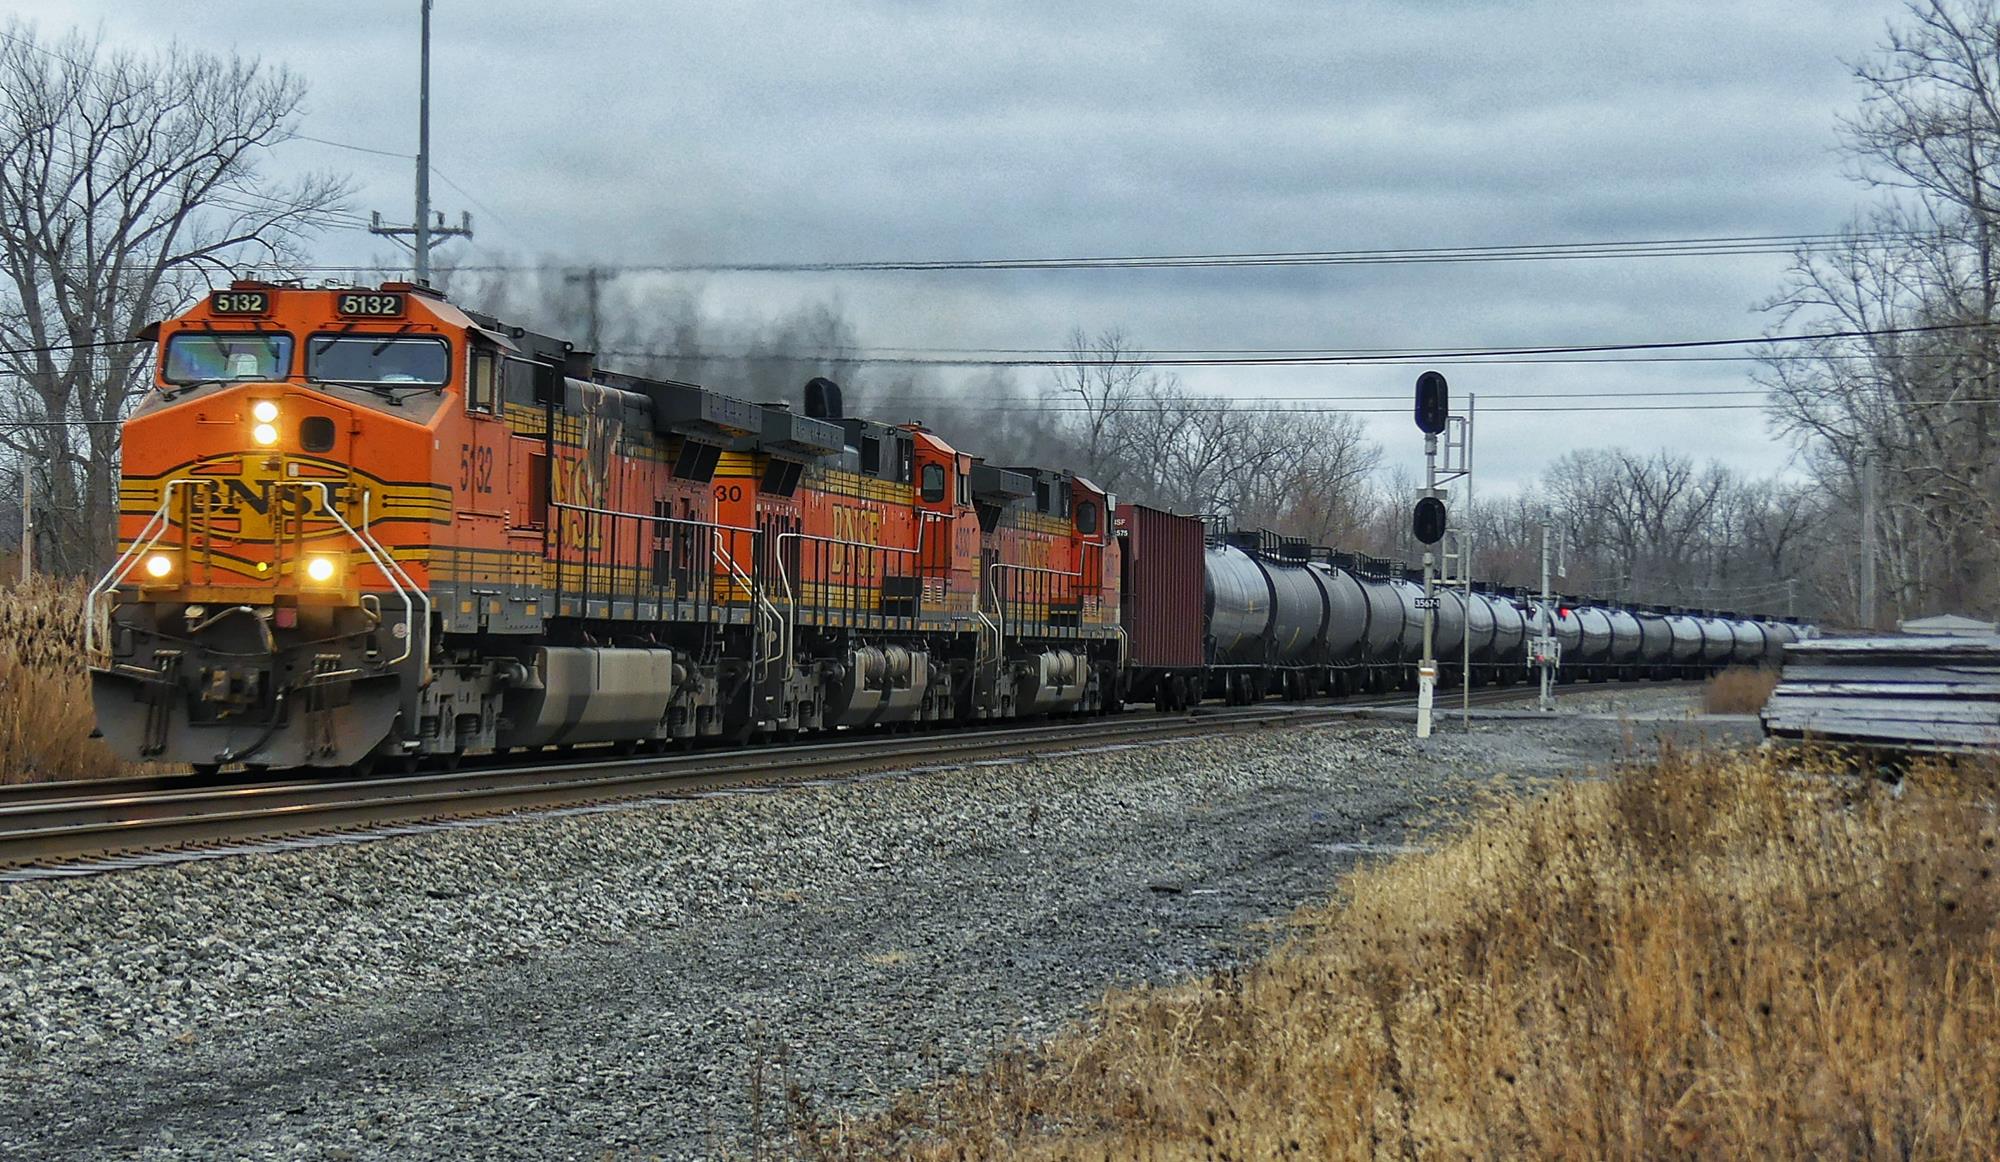 BNSF 5132 is a class GE C44-9W (Dash 9-44CW) and  is pictured in Macedon, New York, USA.  This was taken along the Rochester  on the CSX Transportation. Photo Copyright: Scott  Murnan  uploaded to Railroad Gallery on 12/22/2022. This photograph of BNSF 5132 was taken on Monday, December 12, 2022. All Rights Reserved. 